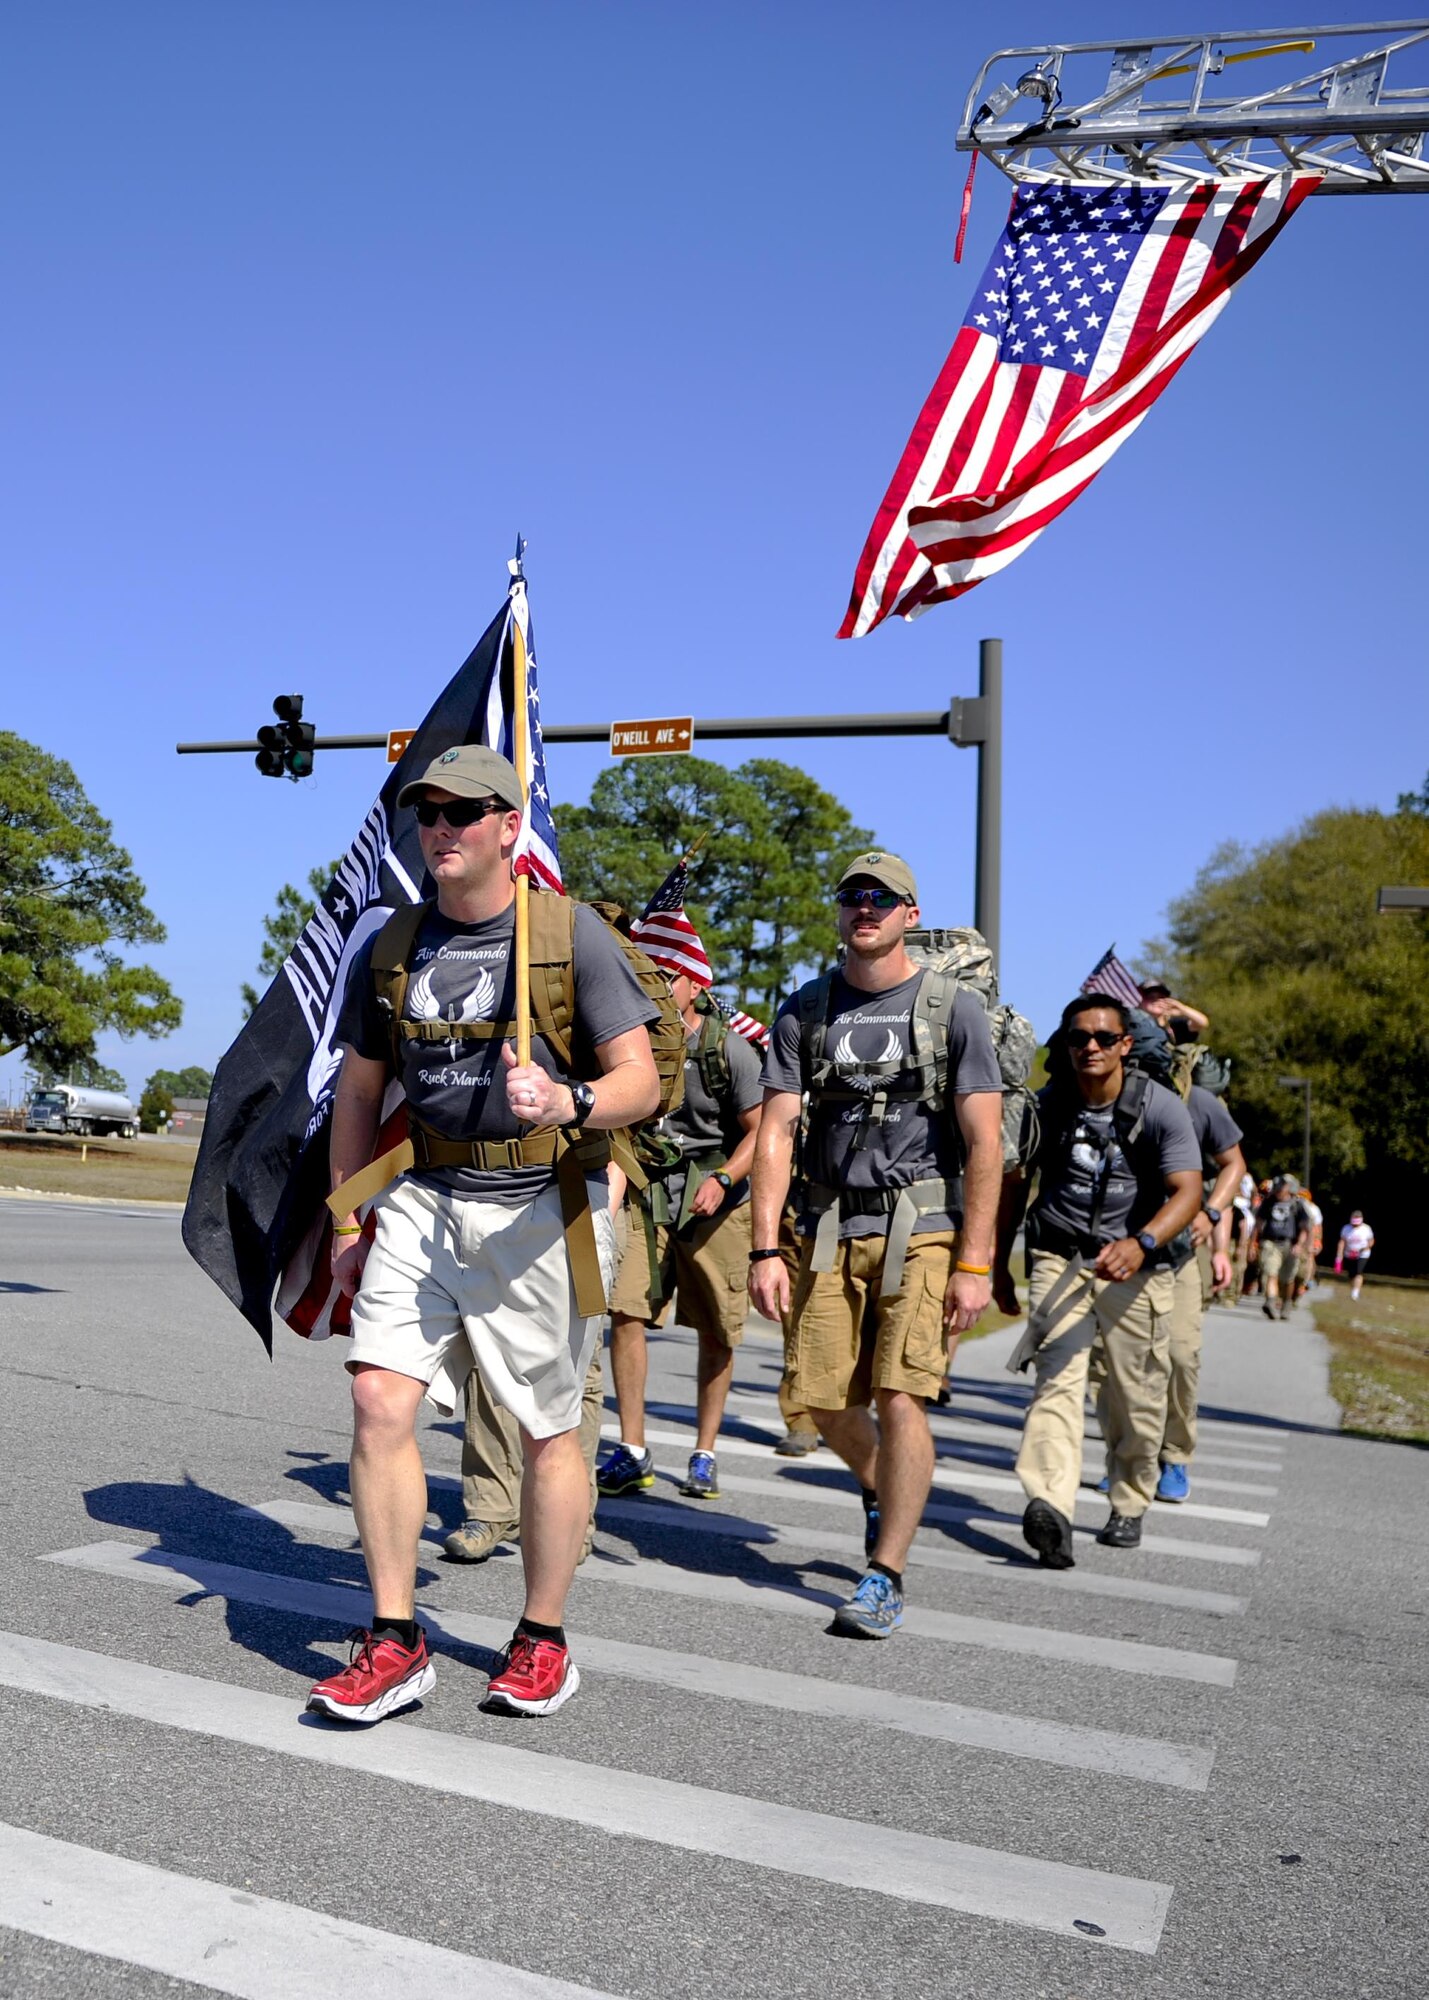 Airmen from the 1st Special Operations Wing arrive at Hurlburt Field, Fla., after a 450-mile ruck march that started at MacDill Air Force Base, Fla., March 20, 2015. The 11 Air Commandos carried flags with the names of the seven fallen Special Operations Command Marines and four Army National Guard air crew members that lost their lives during a training mission, March 10, 2015. (U.S. Air Force photo/Senior Airman Christopher Callaway/Released)